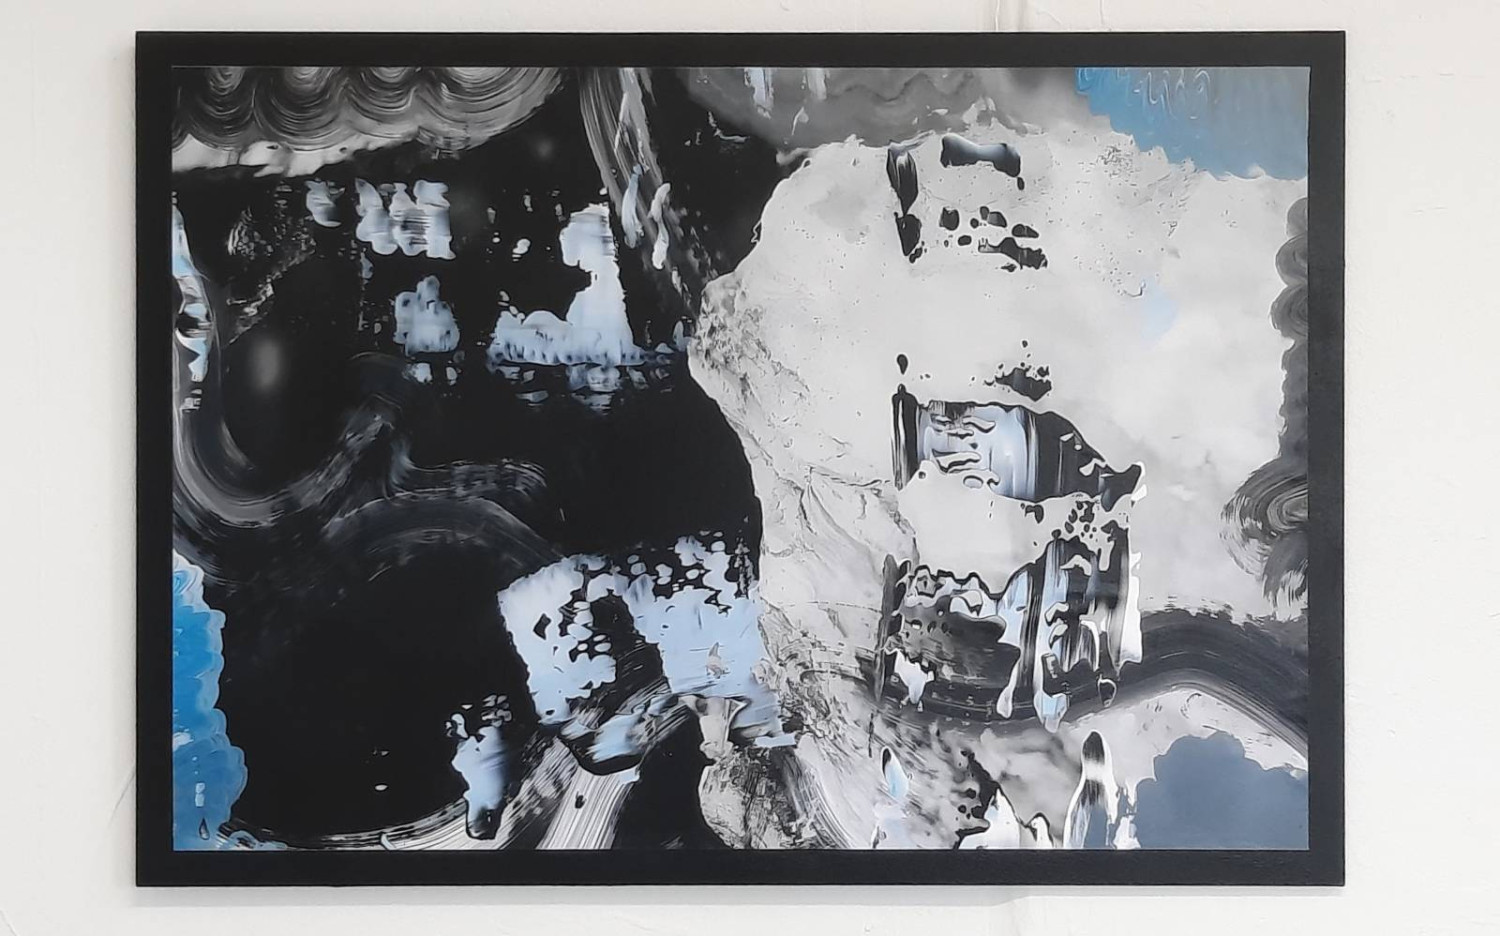 *Thermocline*, print of painted photograph mounted on 6mm mdf, 54.4 x 84.1cm